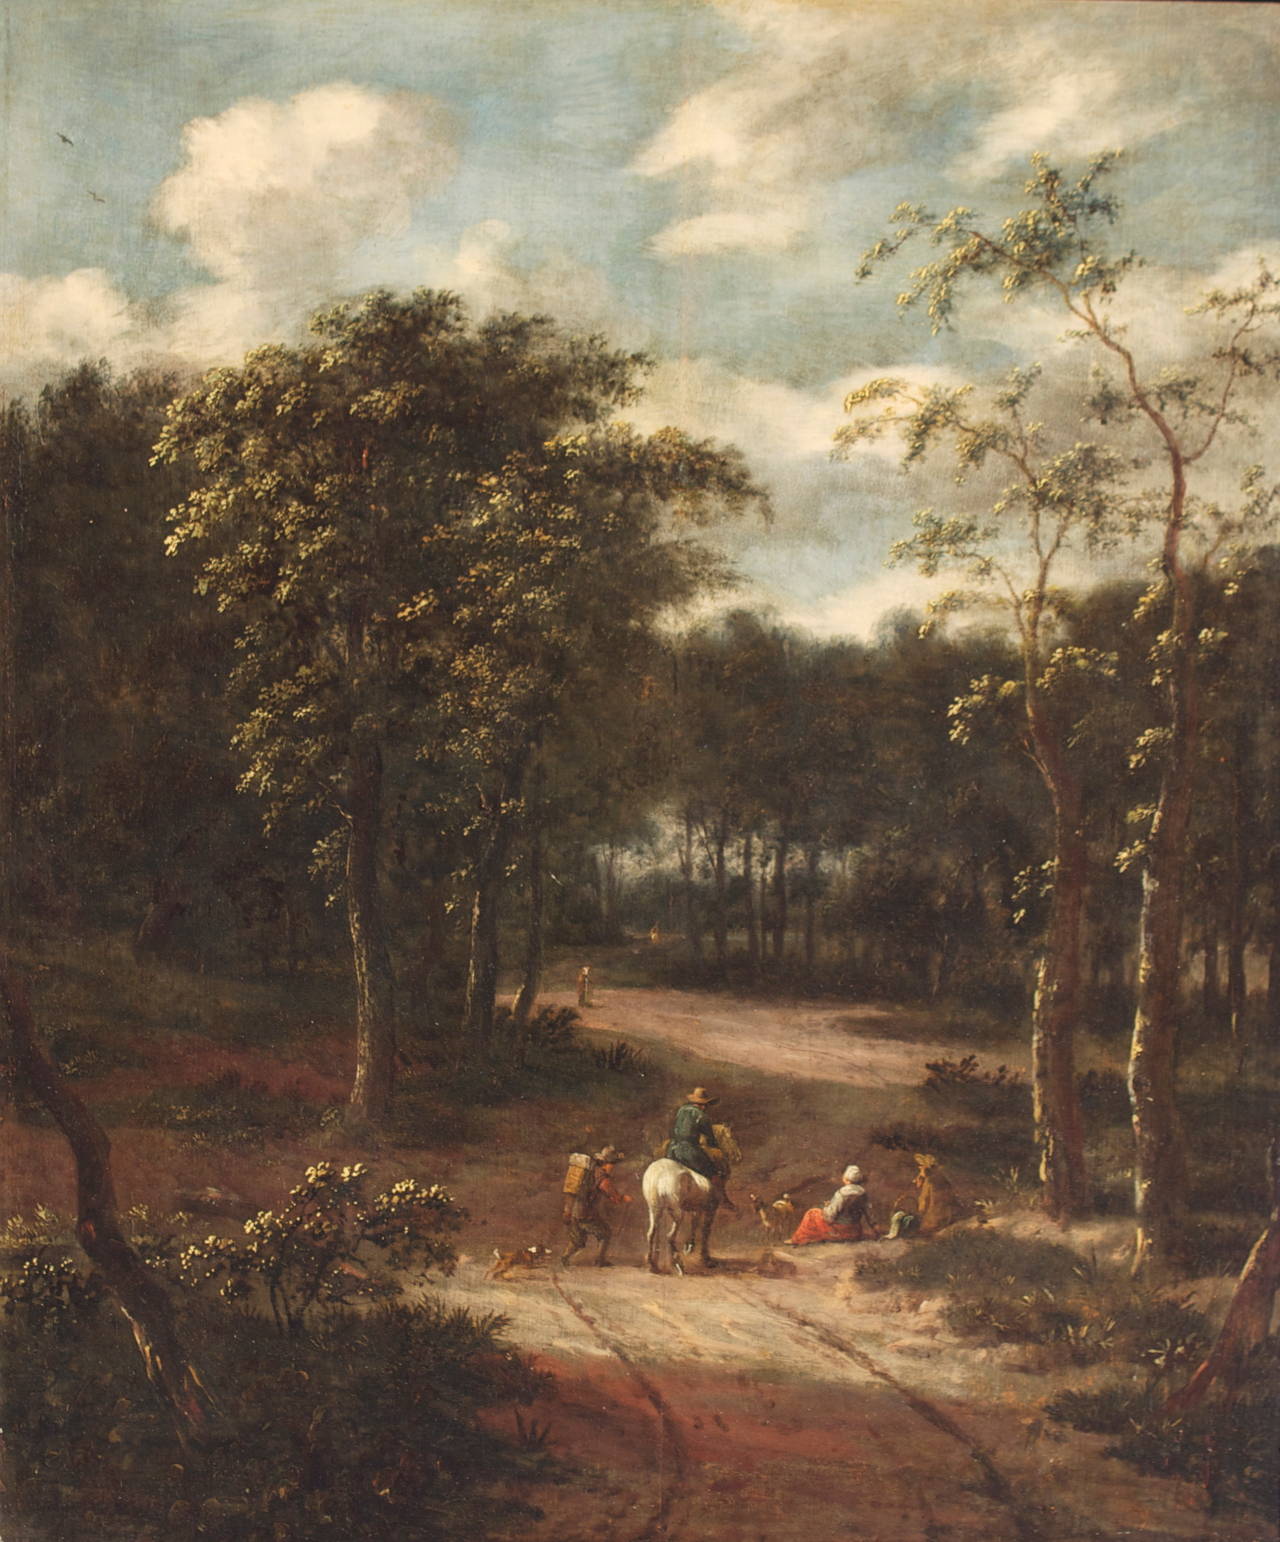 Unknown Landscape Painting - 17thc. Dutch School, Forest Interior with Travelers at Rest